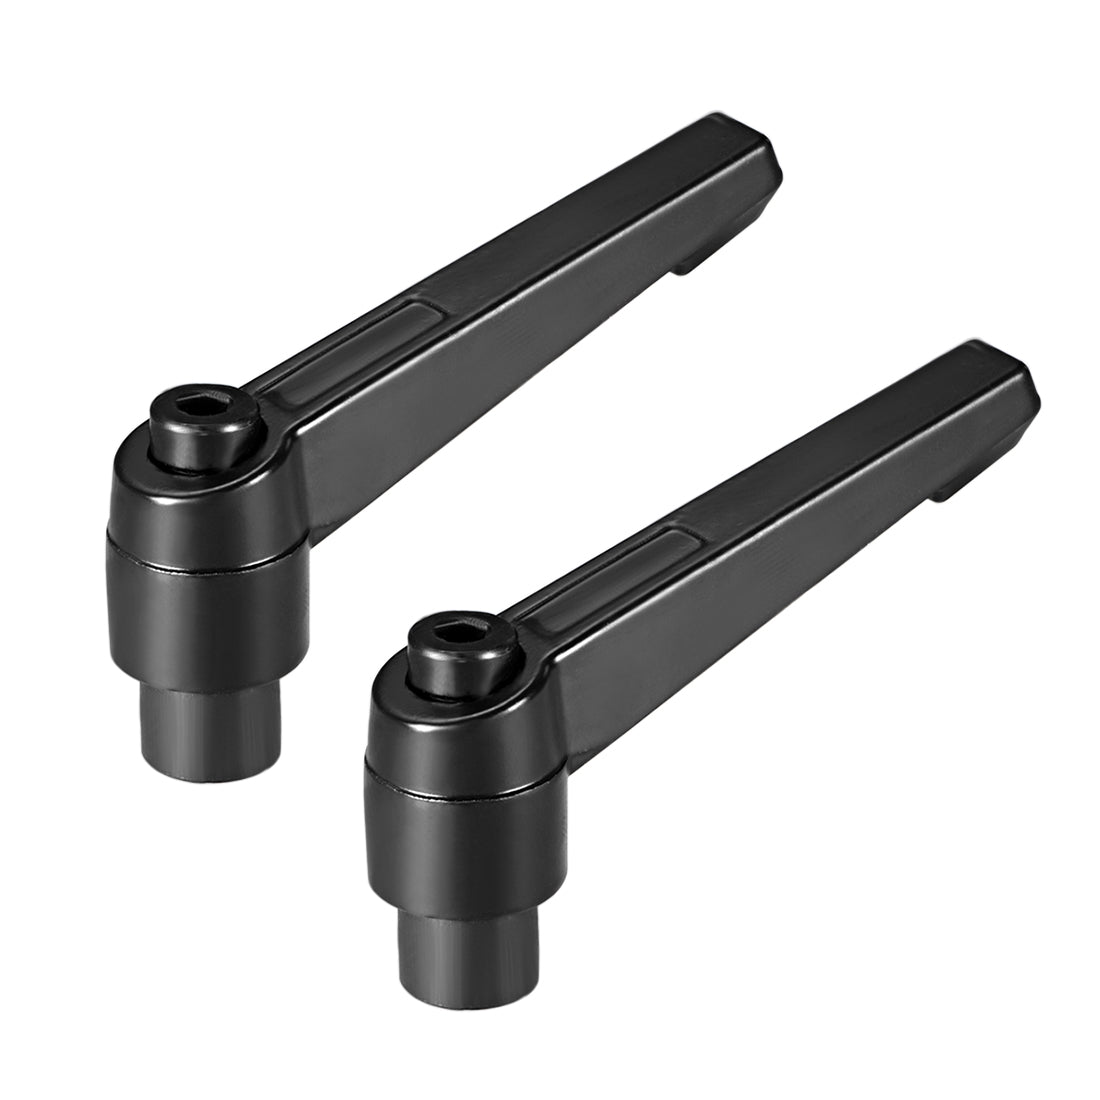 Uxcell Uxcell M6 Handle Adjustable Clamping Lever Thread Push Button Ratchet Female Threaded Stud 2 Pcs